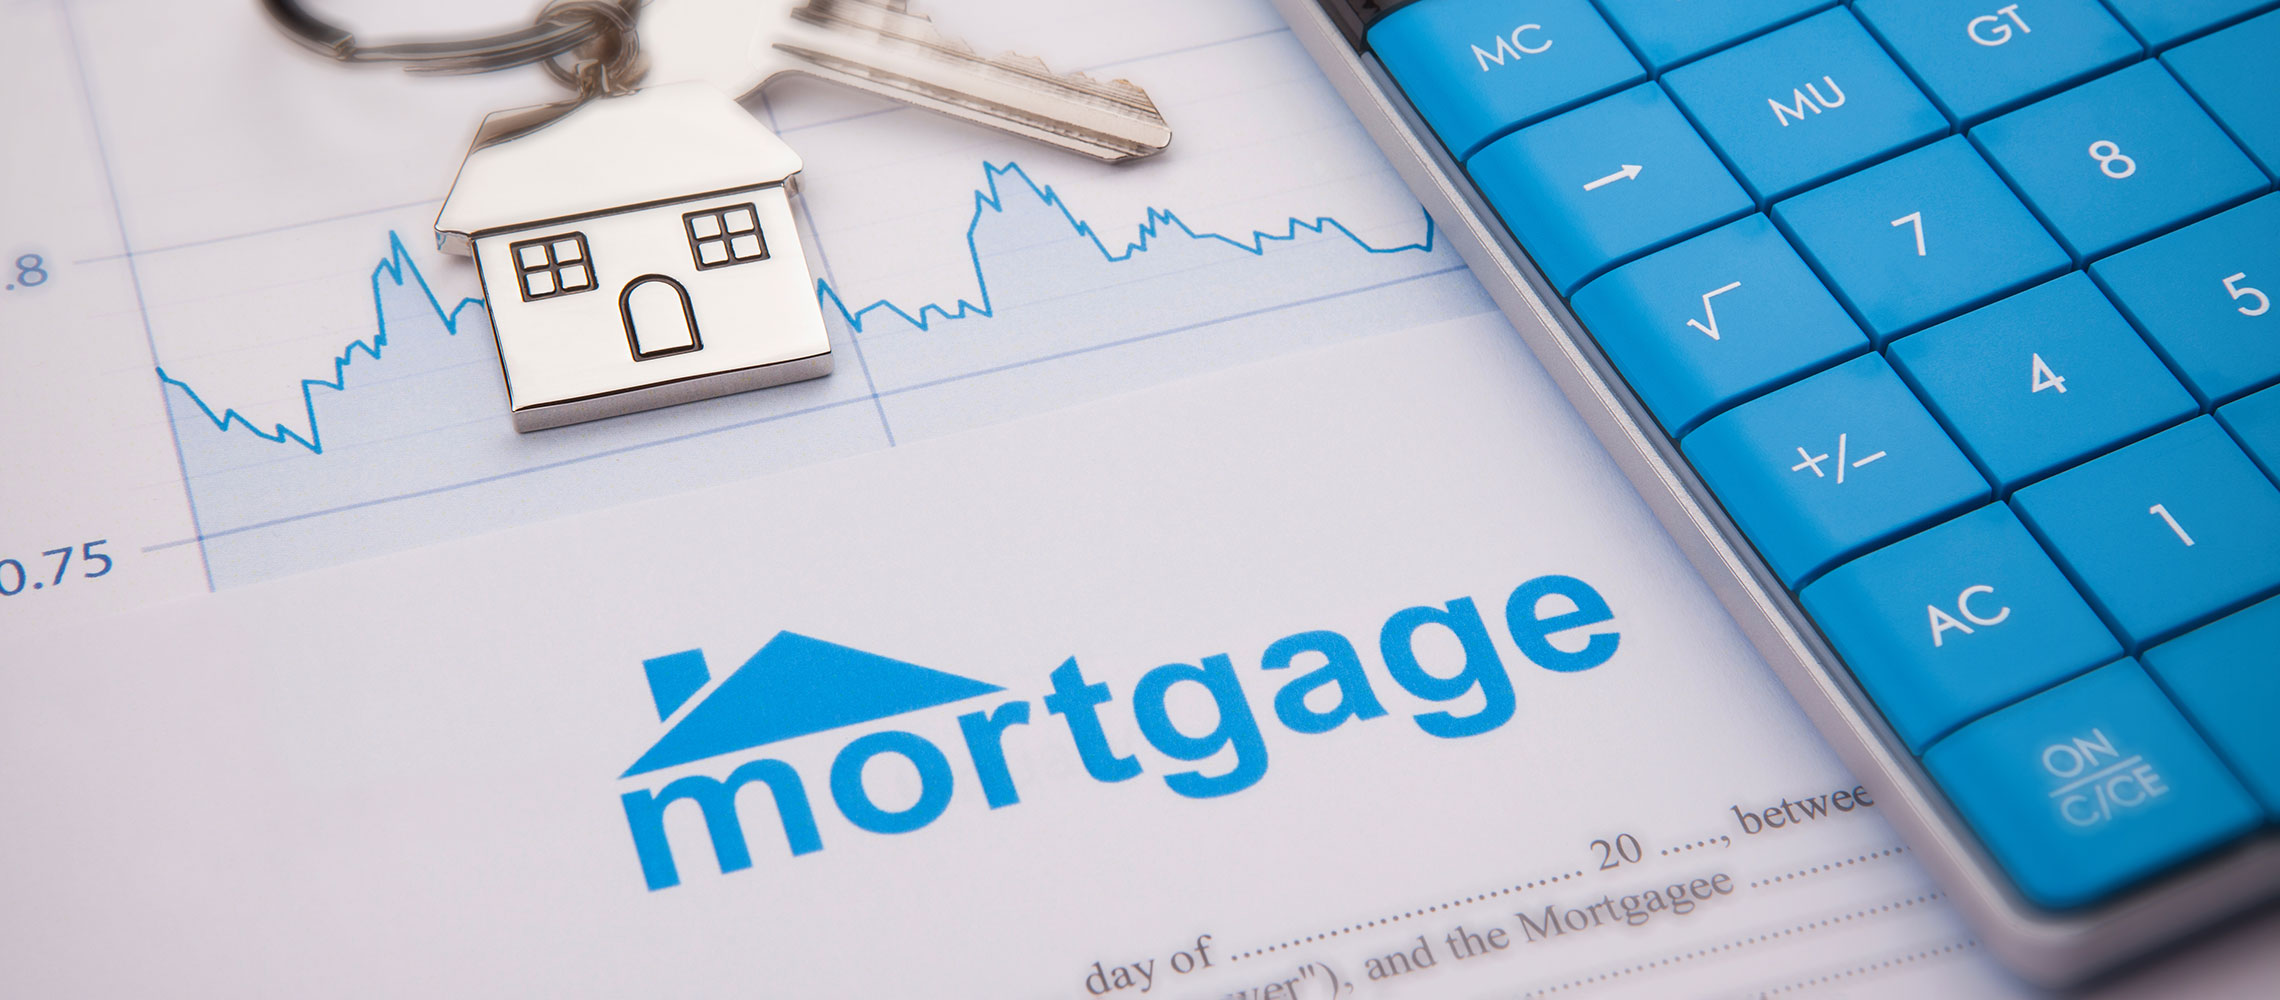 Mortgage Point Paperwork with calculator